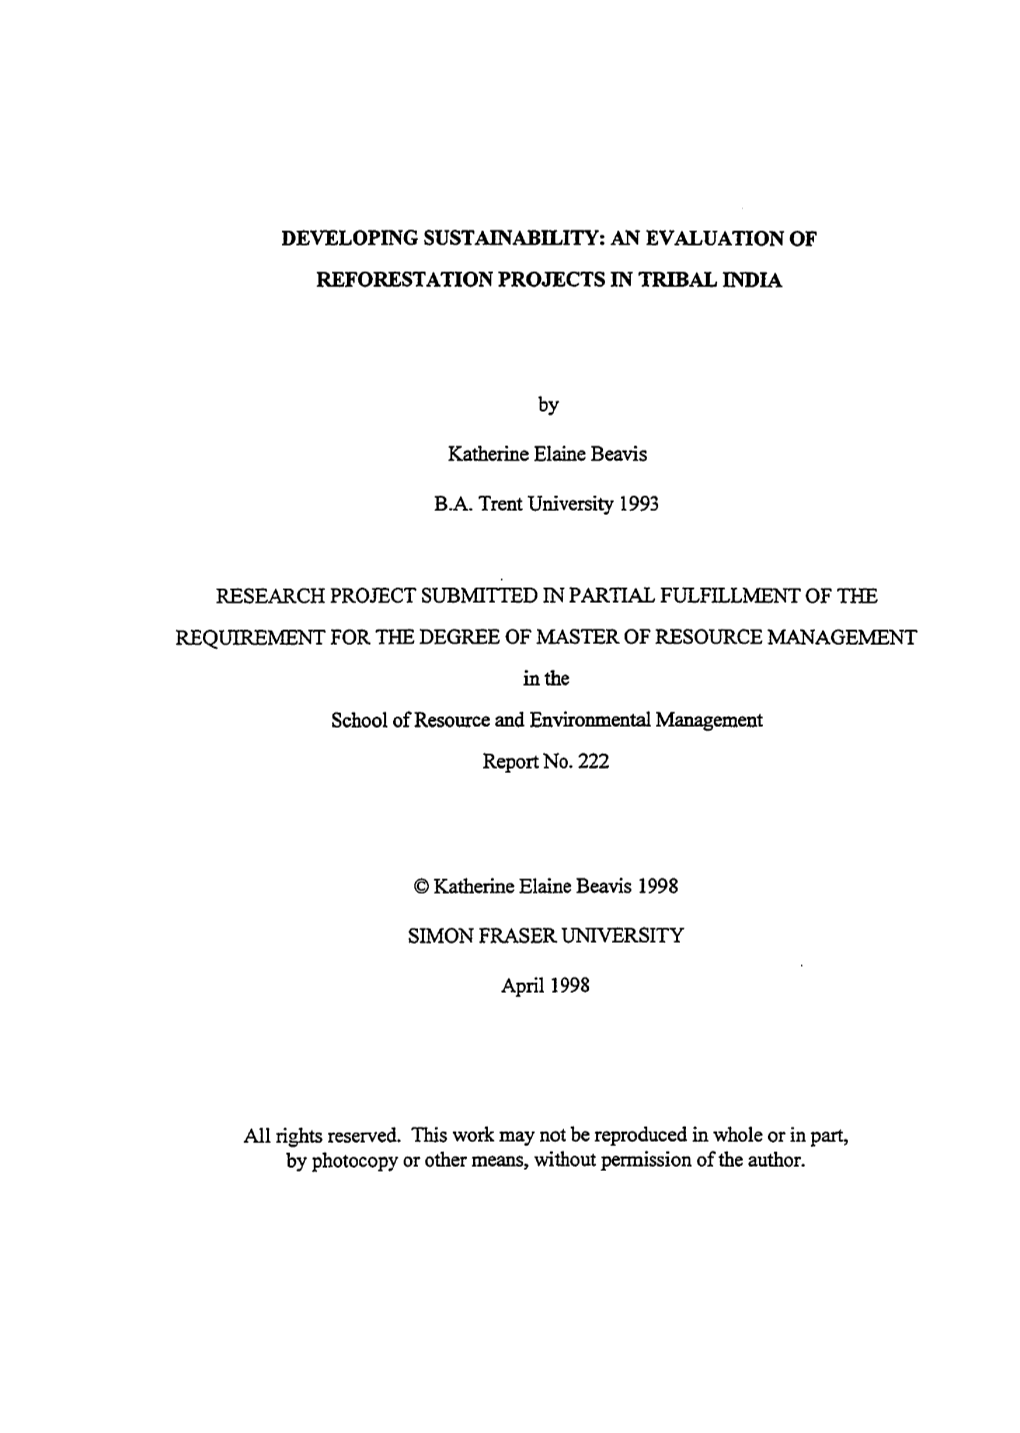 Developing Sustainability: an Evaluation of Reforestation Projects in Tribal India